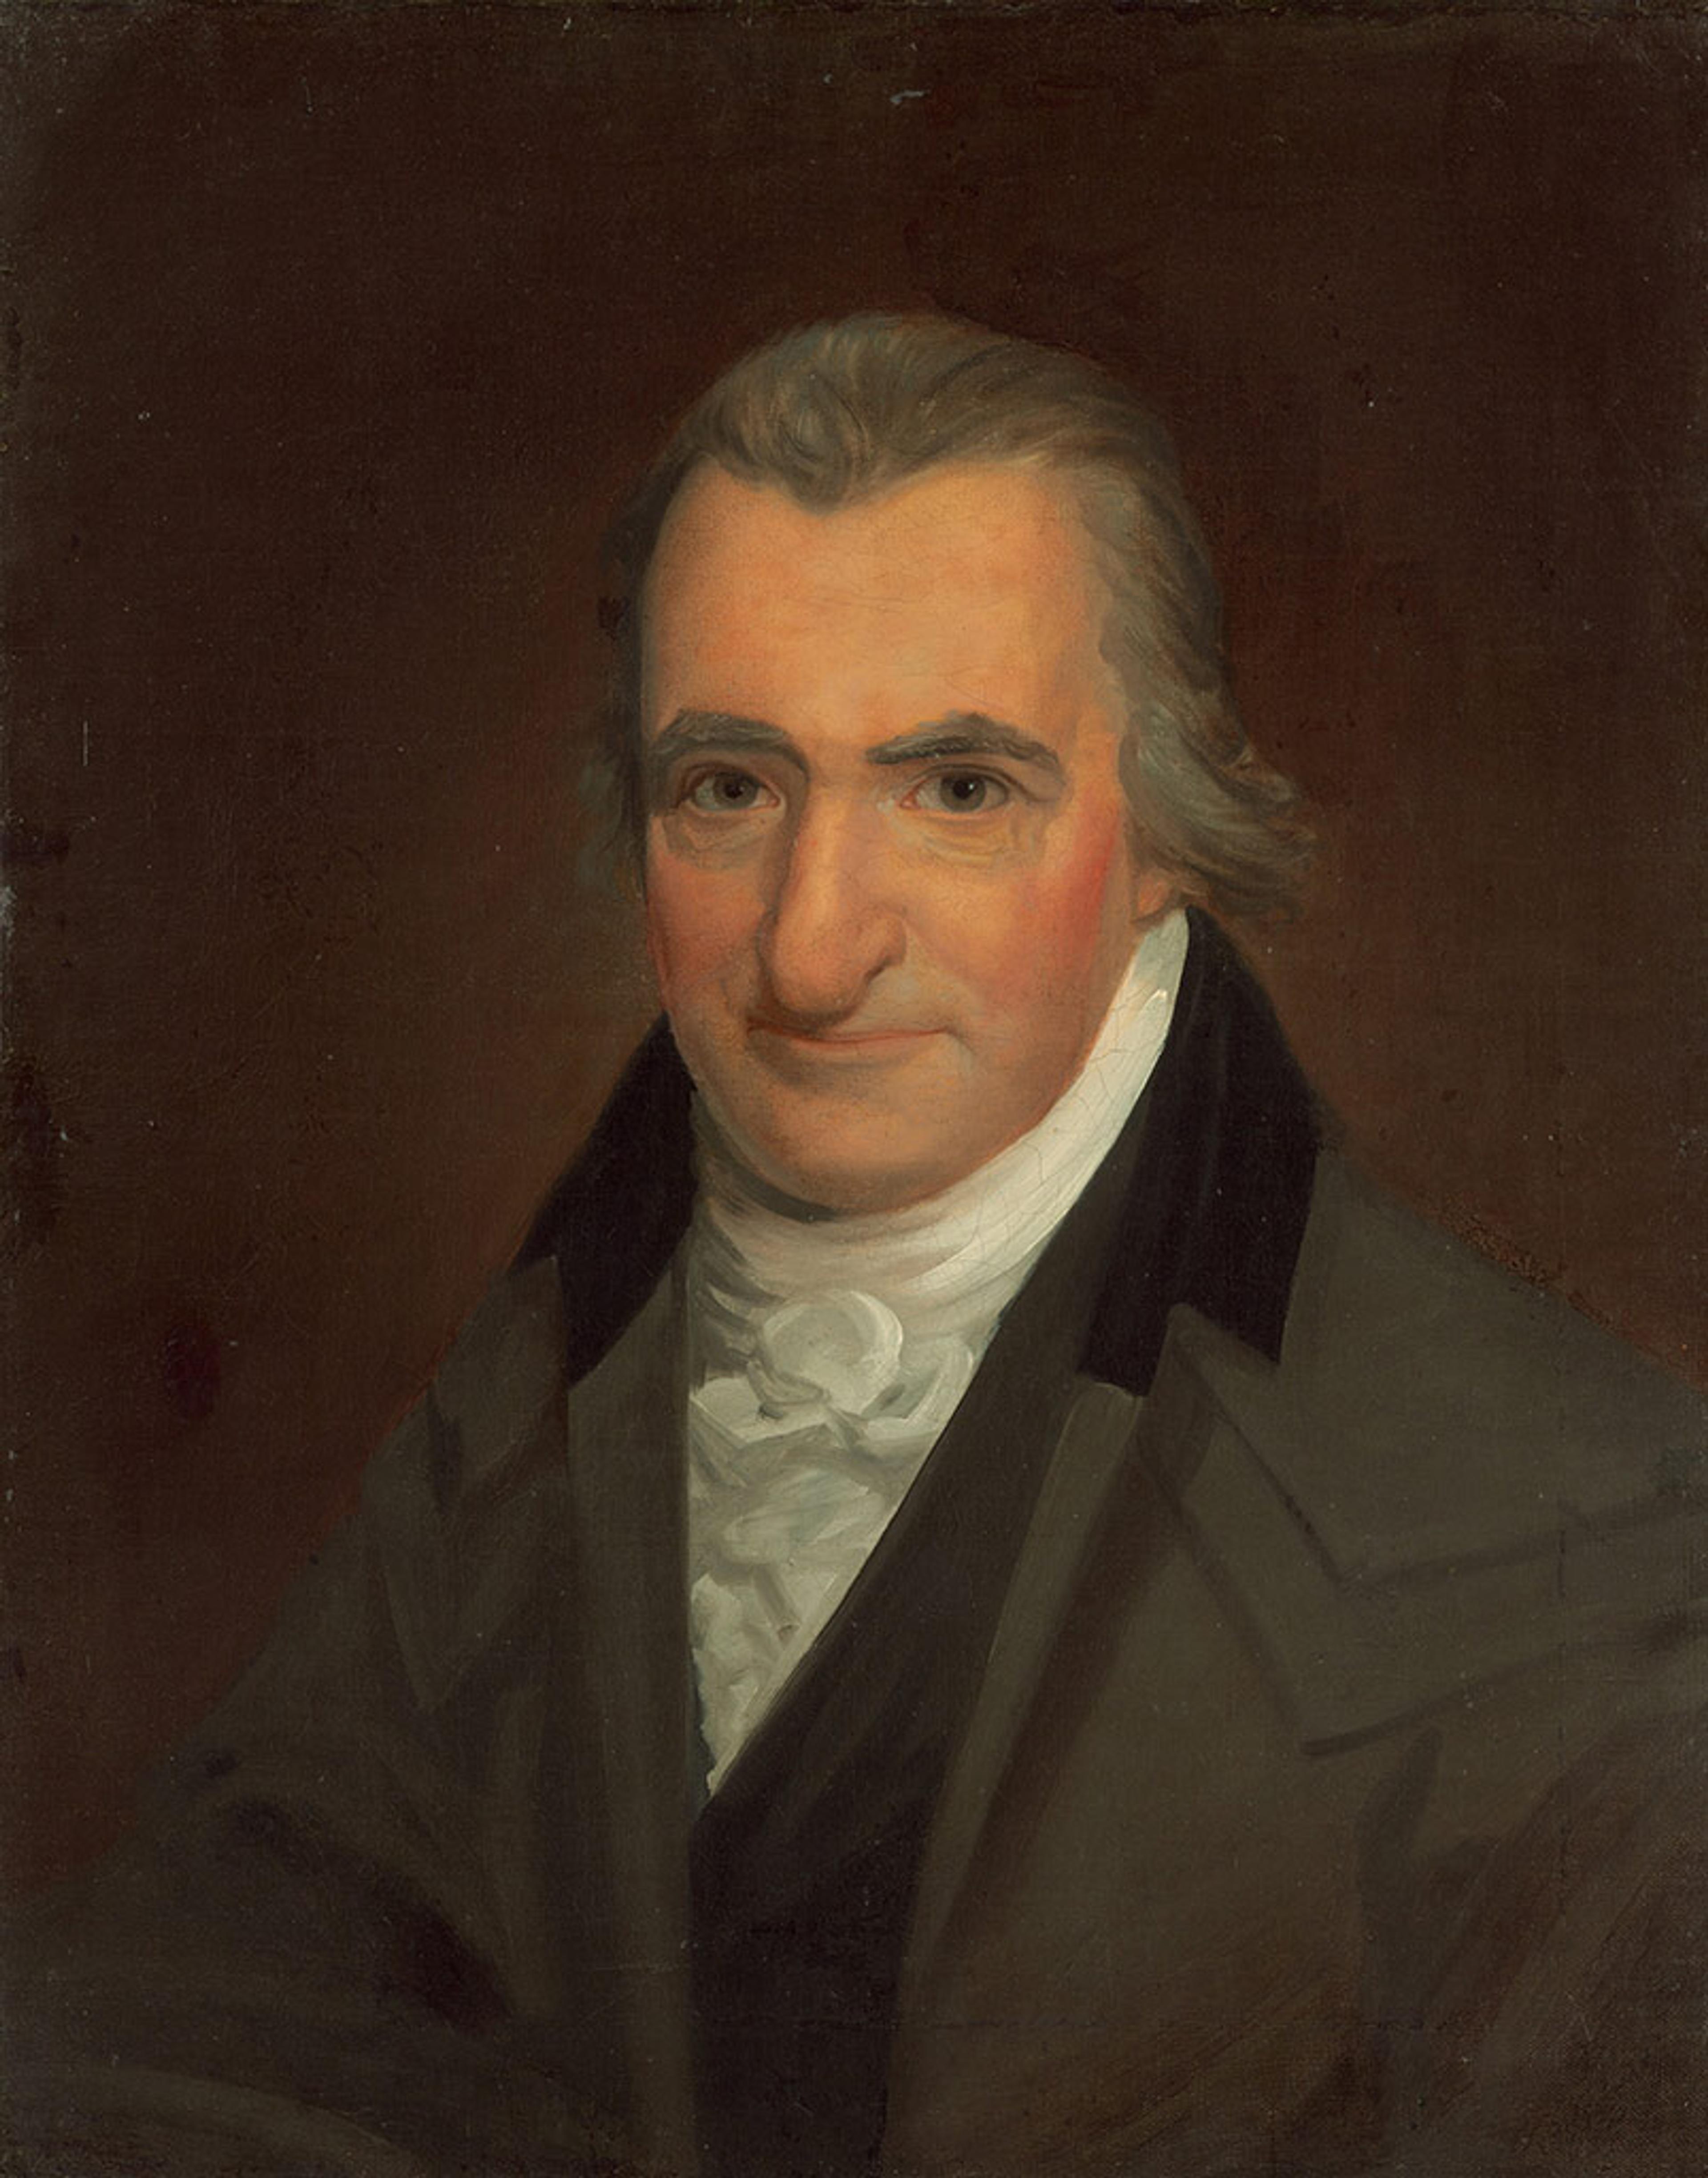 Portrait of an older man with light grey hair wearing a dark coat and white cravat. The background is dark brown, and the man is gazing forward with a slight smile. The painting has a classical style.